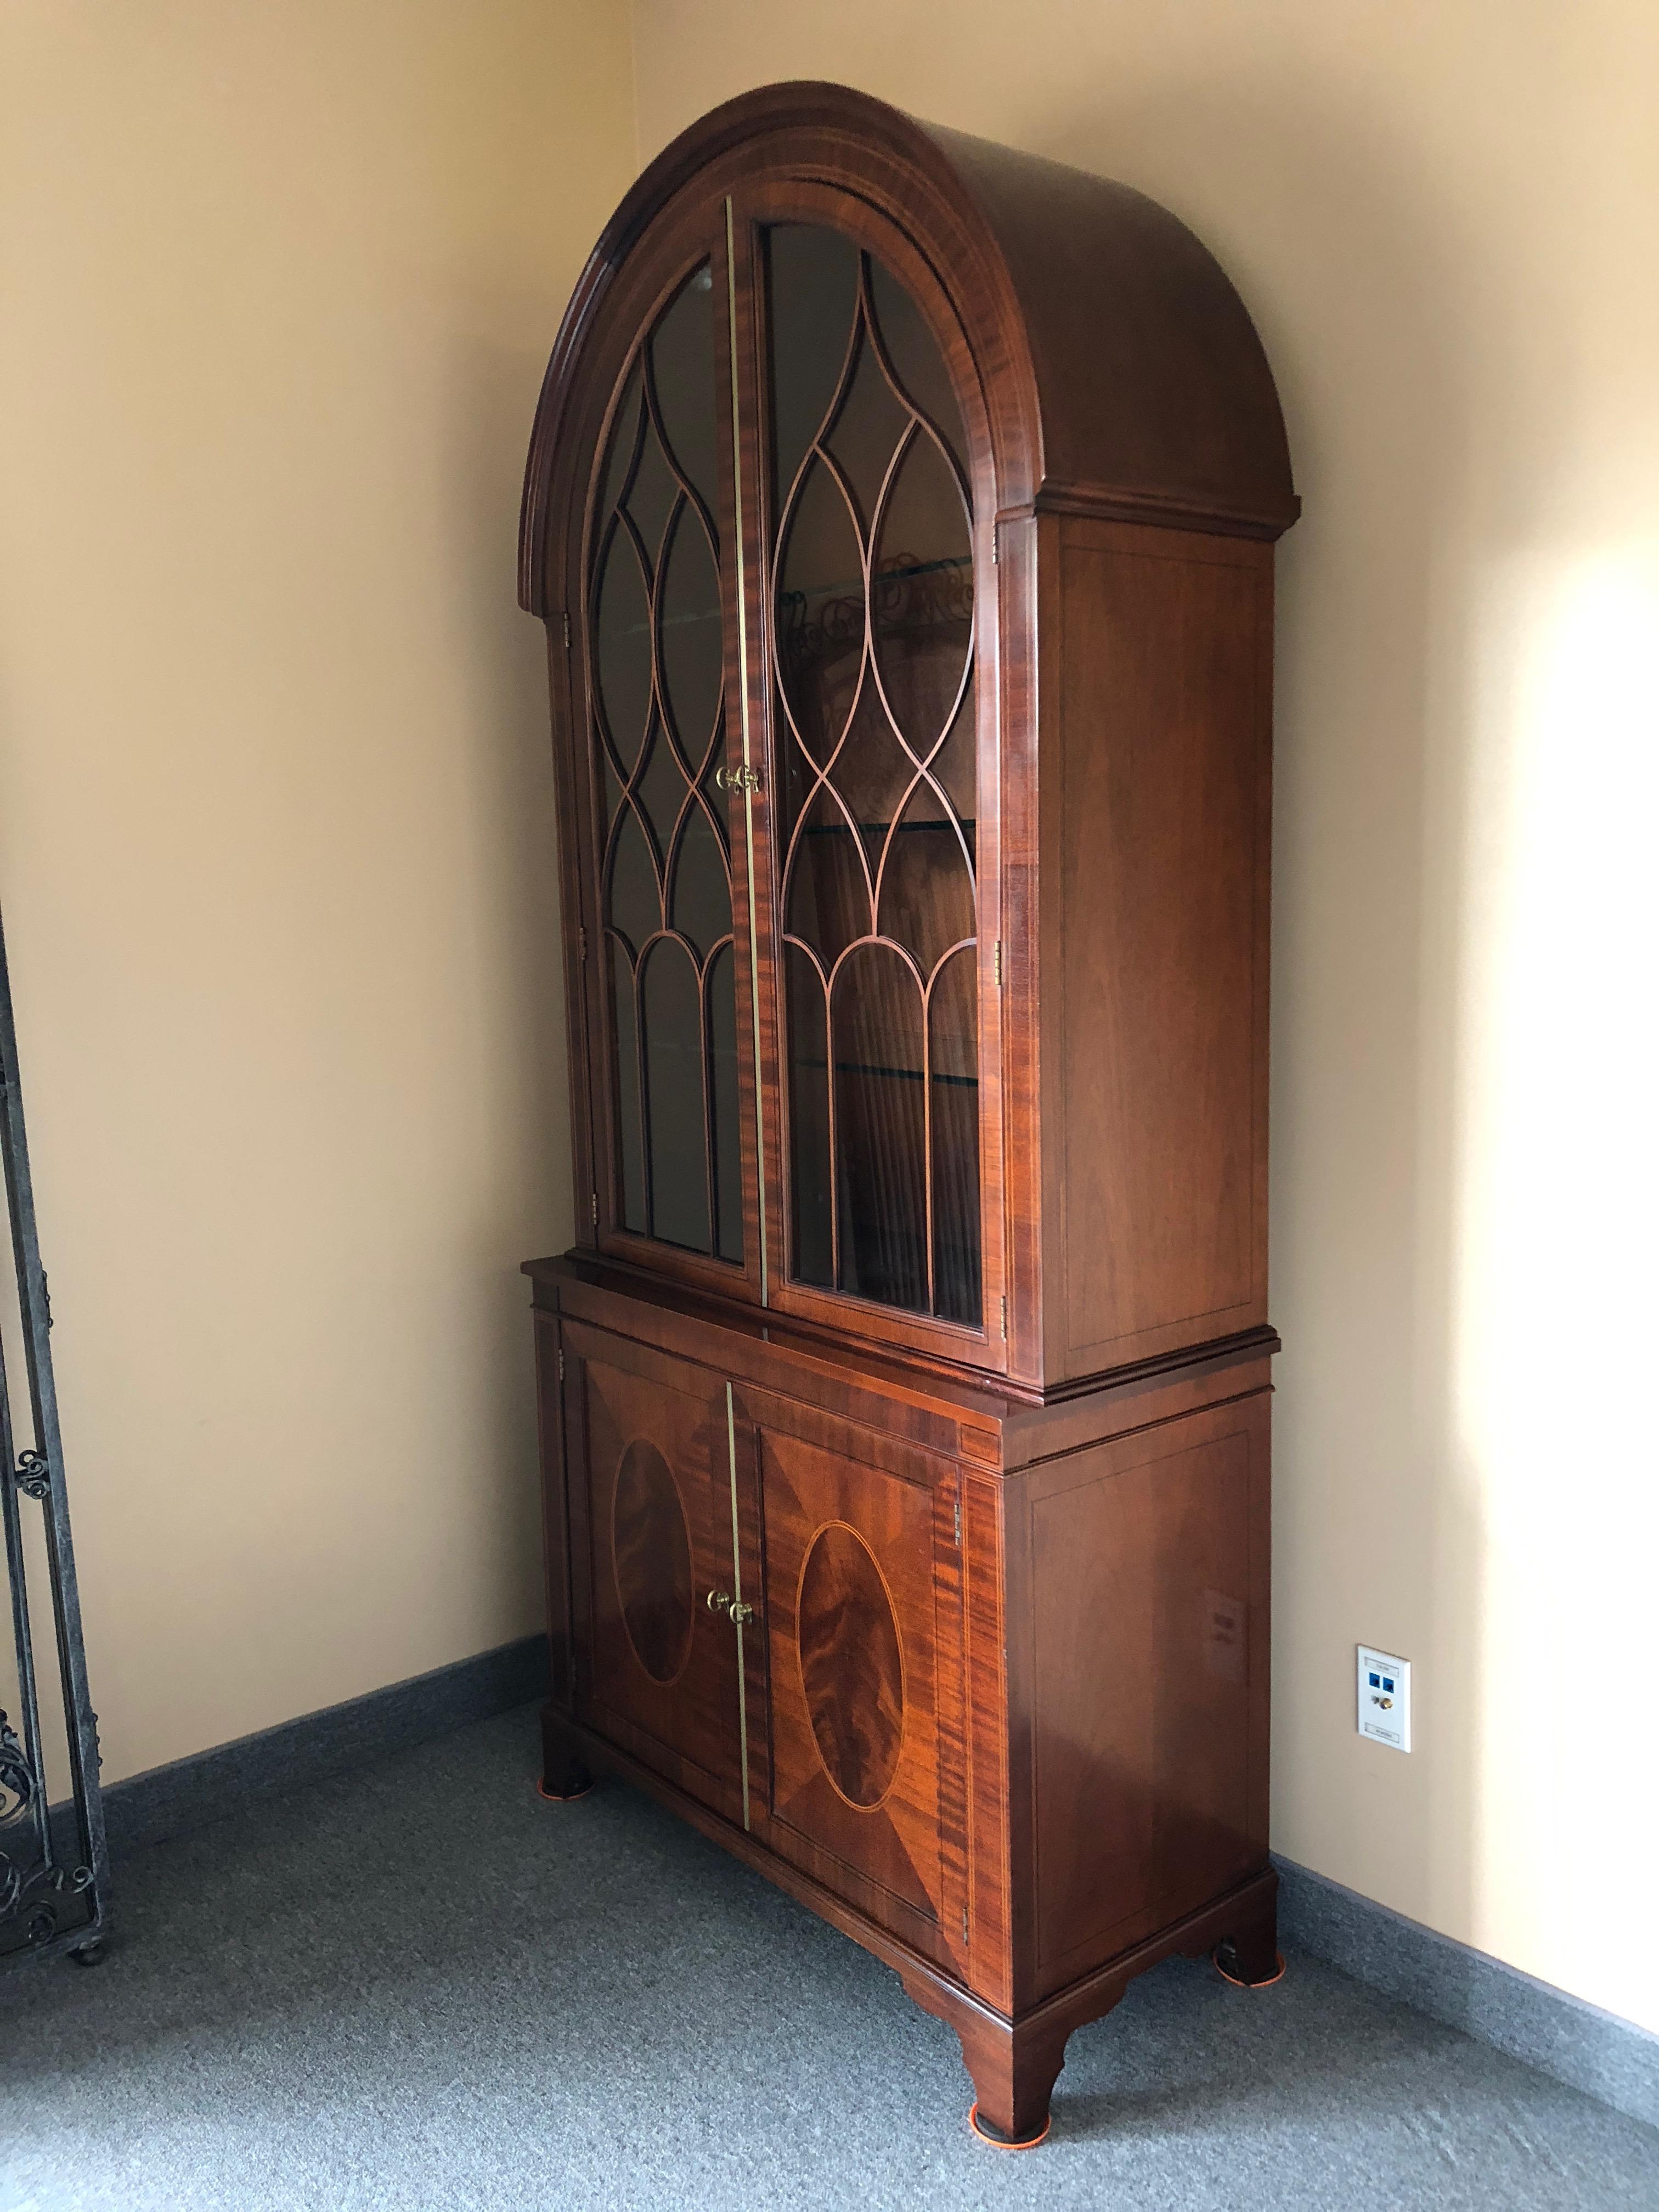 Beautifully made very elegant Baker breakfront or china display cabinet having a lovely rounded arch shape with glass front decorated with pretty criss crosses of wood, interior adjustable glass shelves, and flame mahogany bottom having ebony and